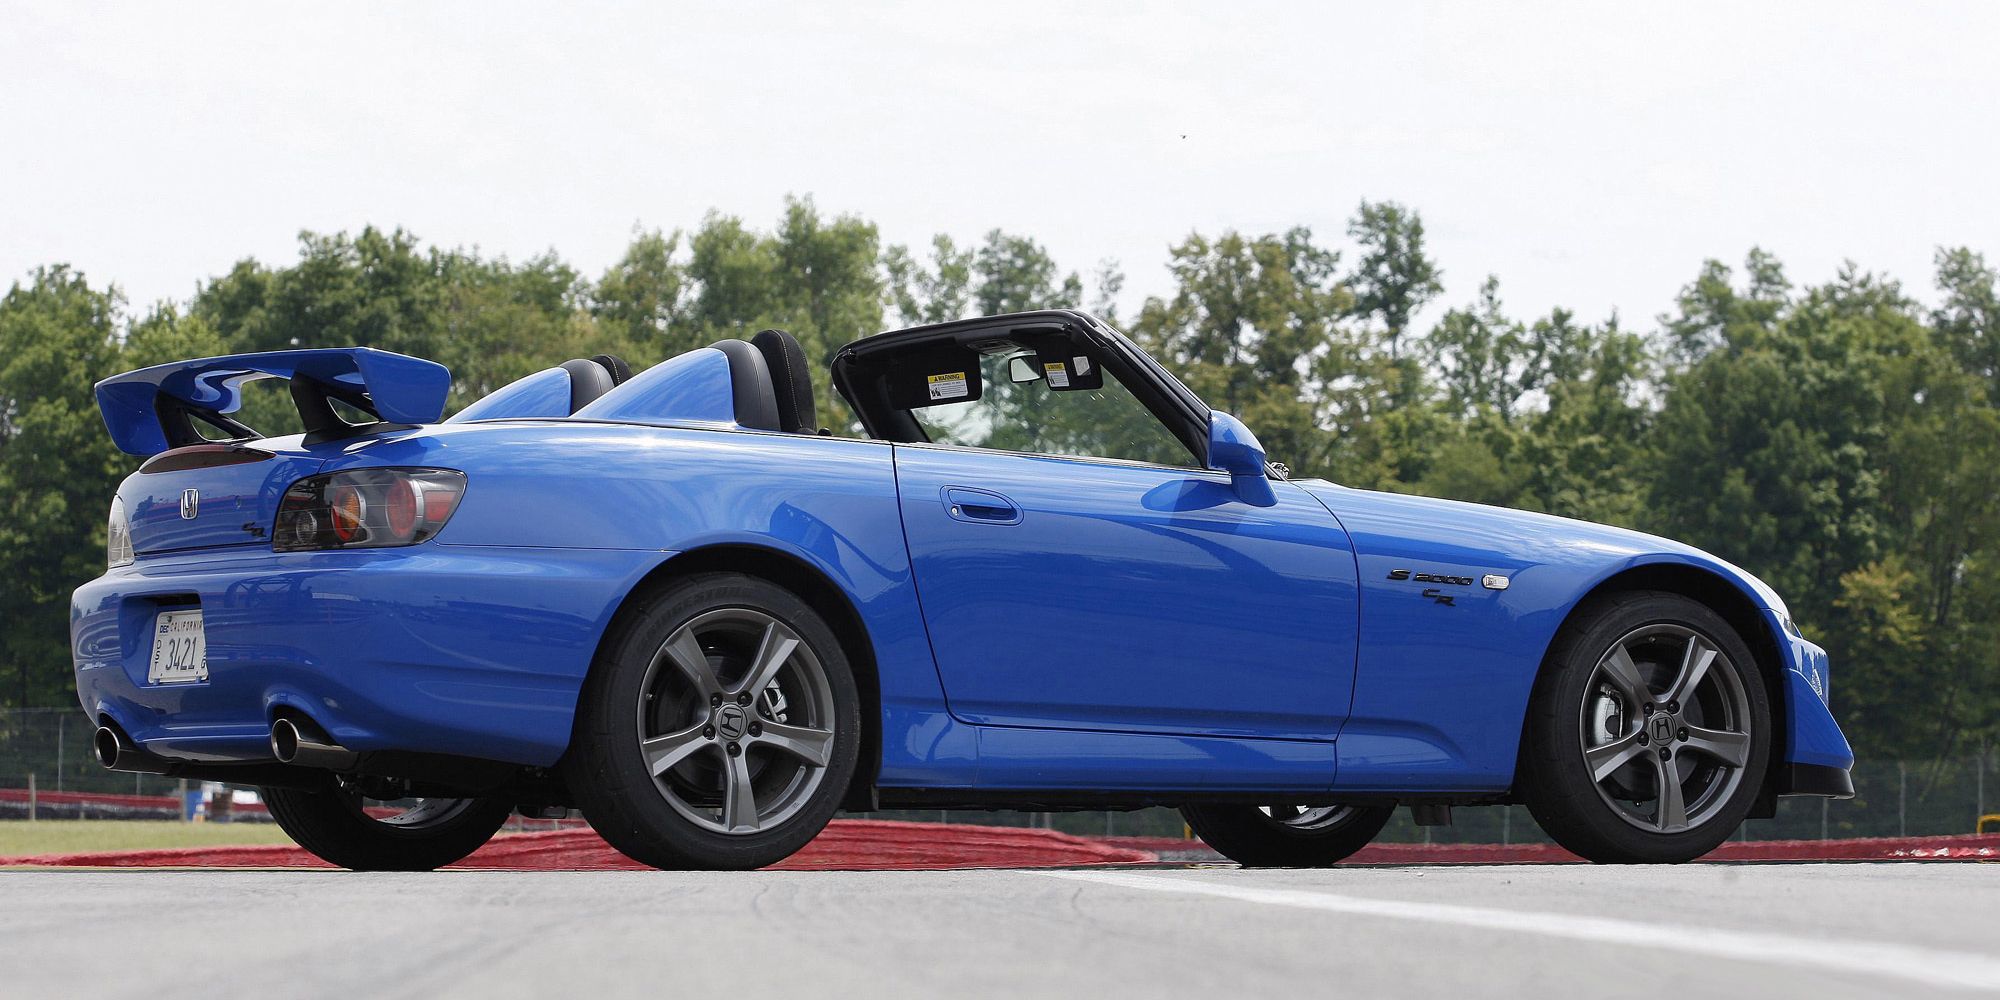 Rear 3/4 view of the S2000 CR